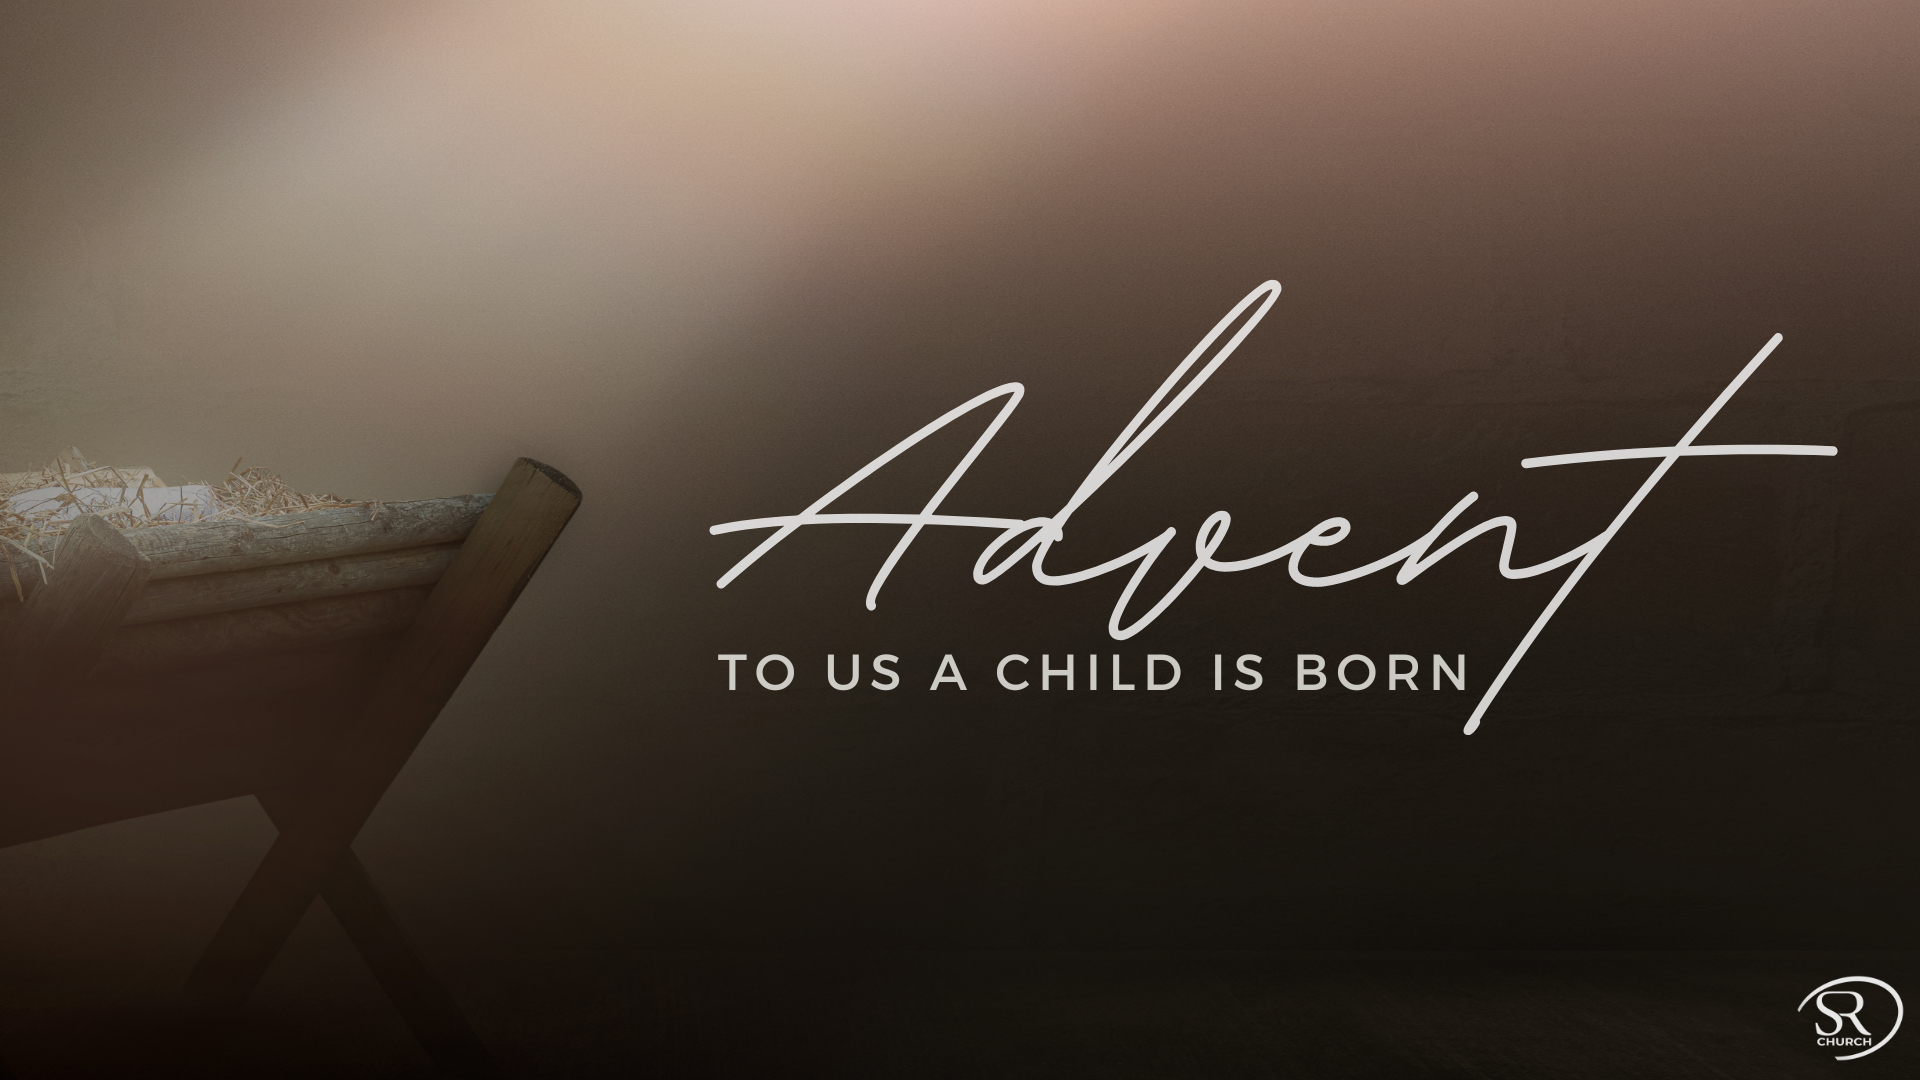 Advent: To Us a Child is Born